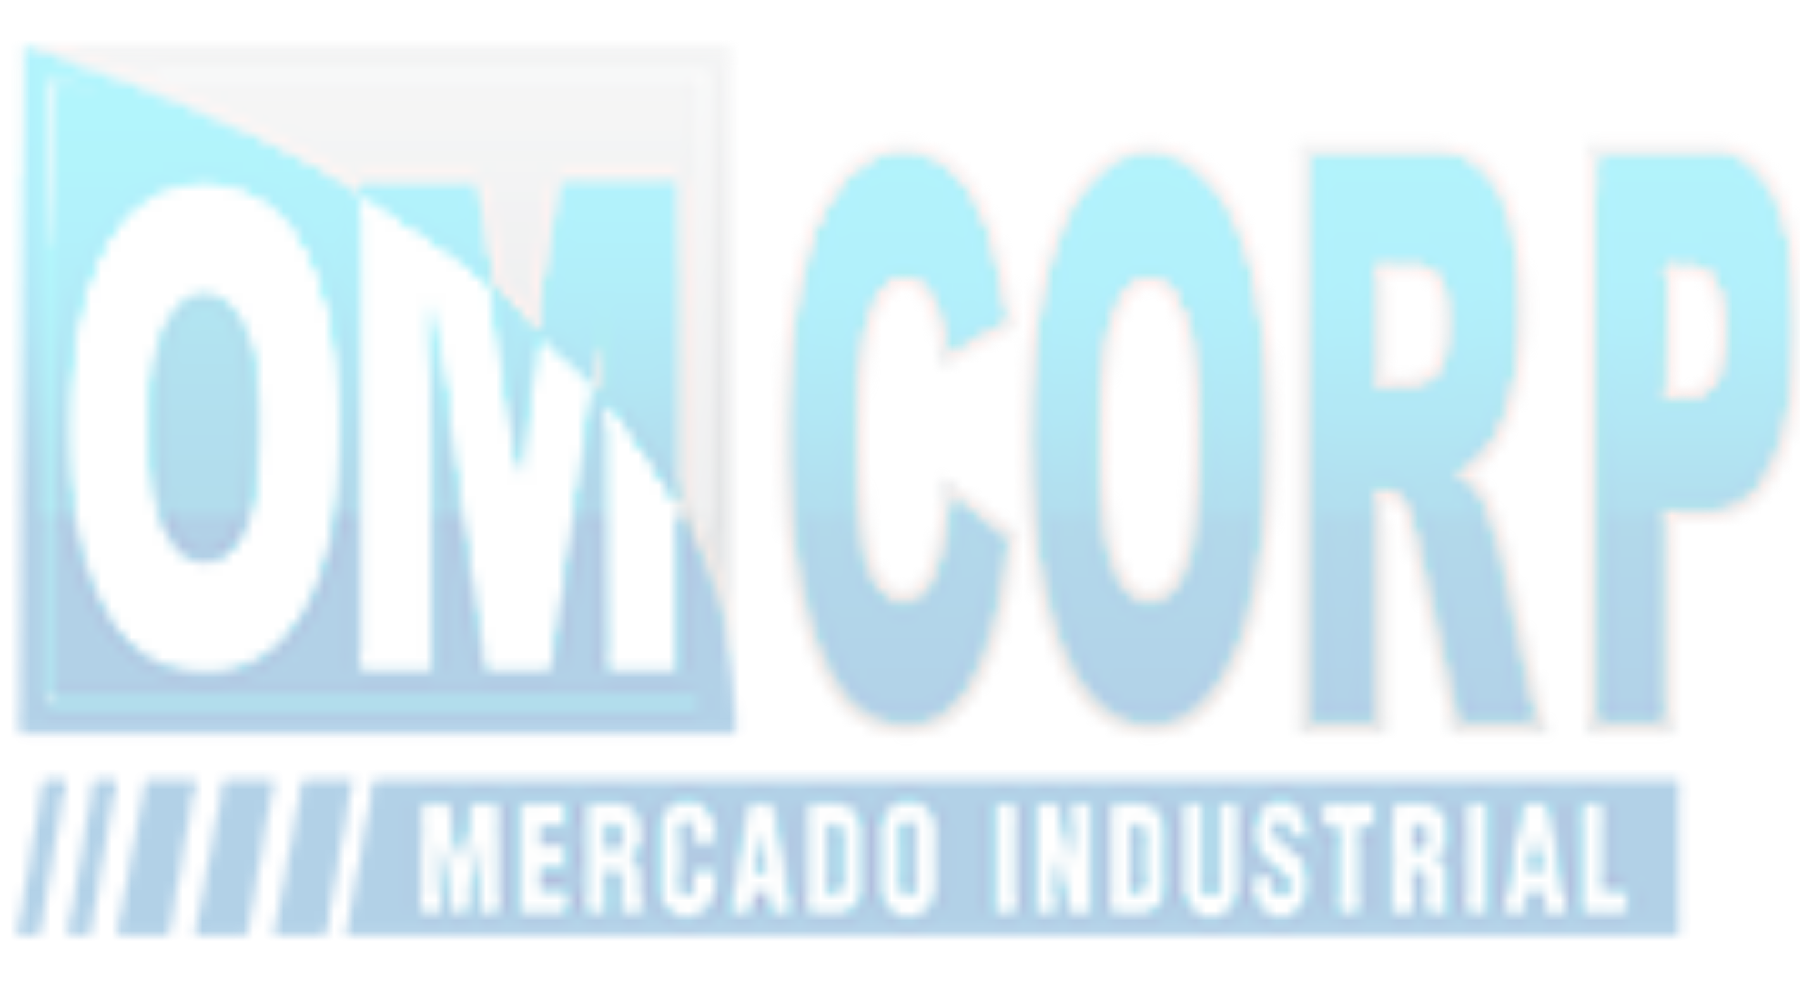 https://agroshow.info/wp-content/uploads/2021/04/OMCORP-fondo.png